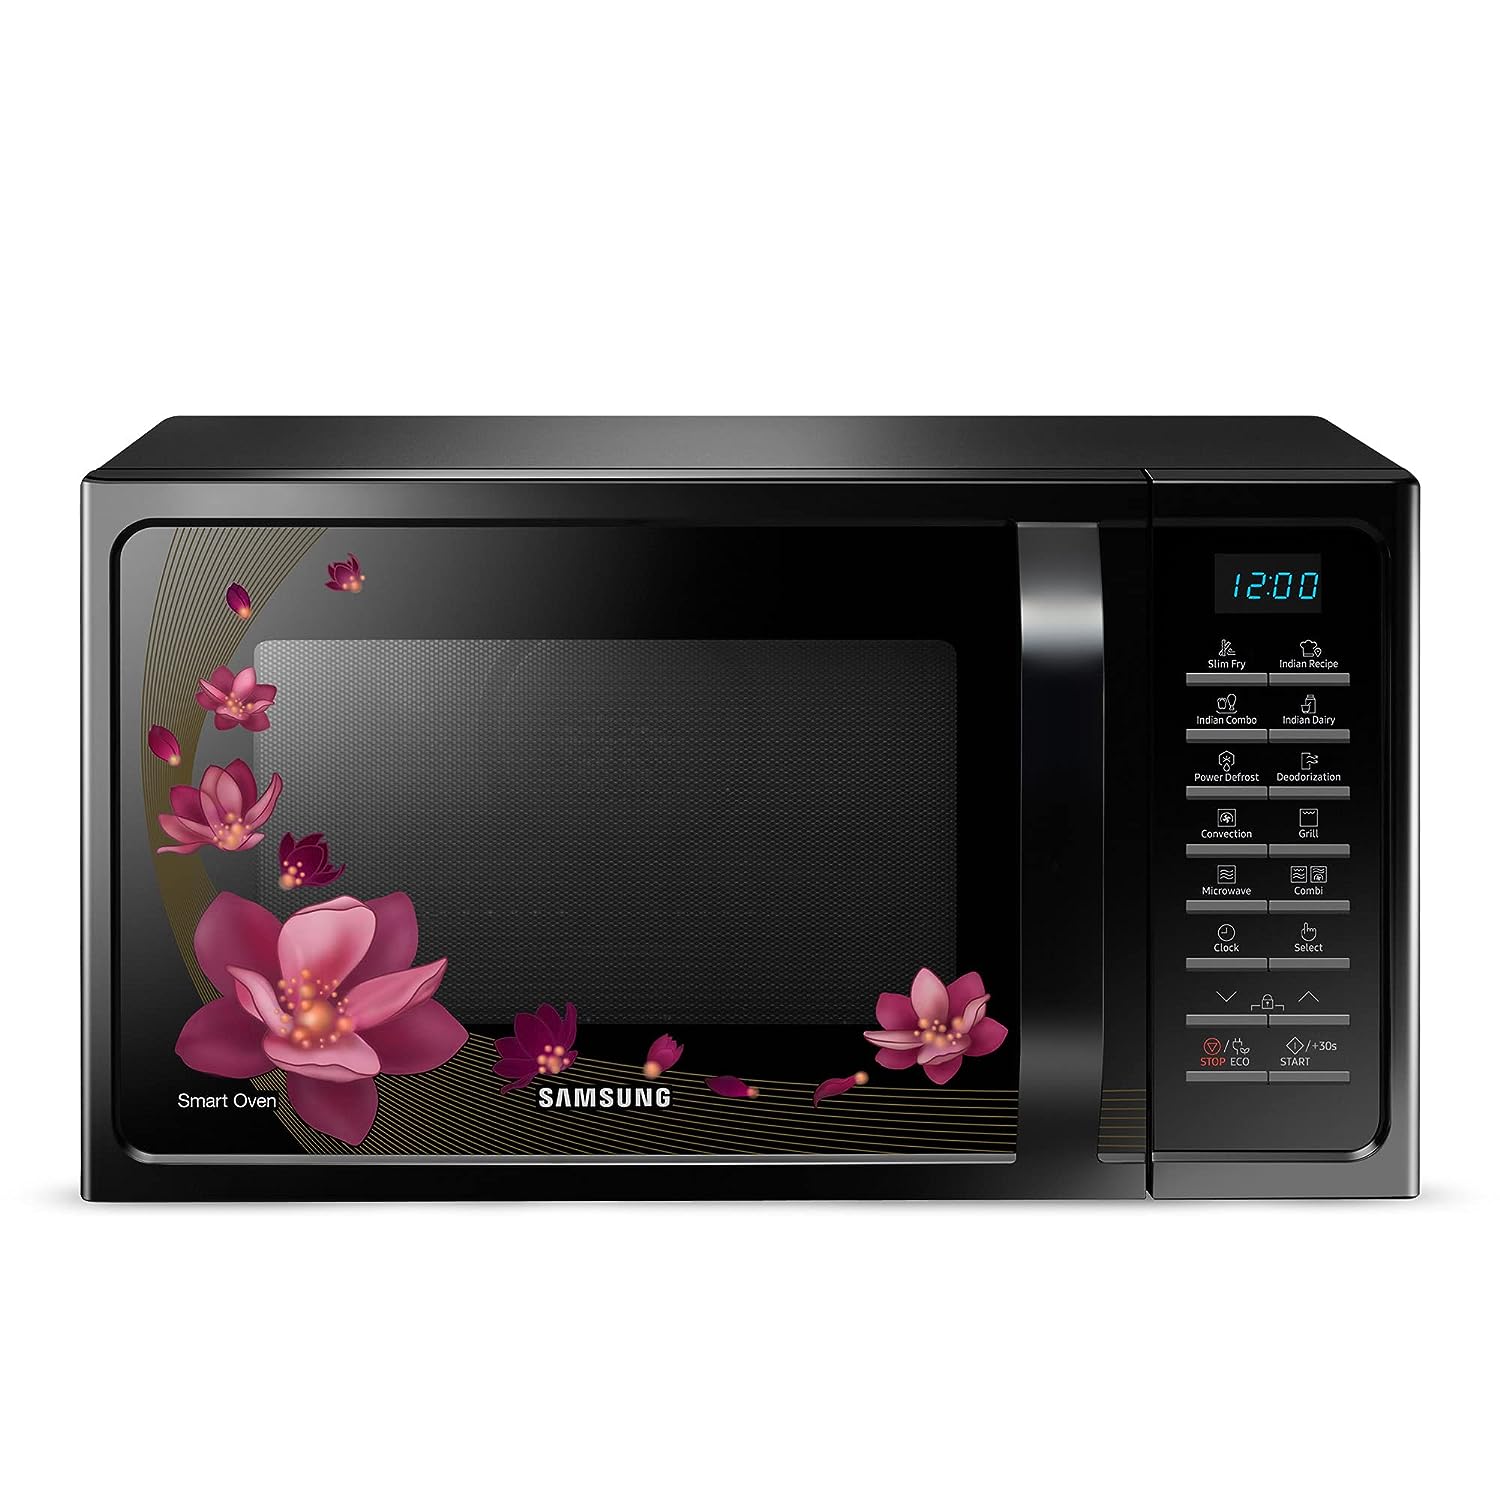 Samsung 28 L Convection Microwave Oven (MC28H5025VP/TL, Black with